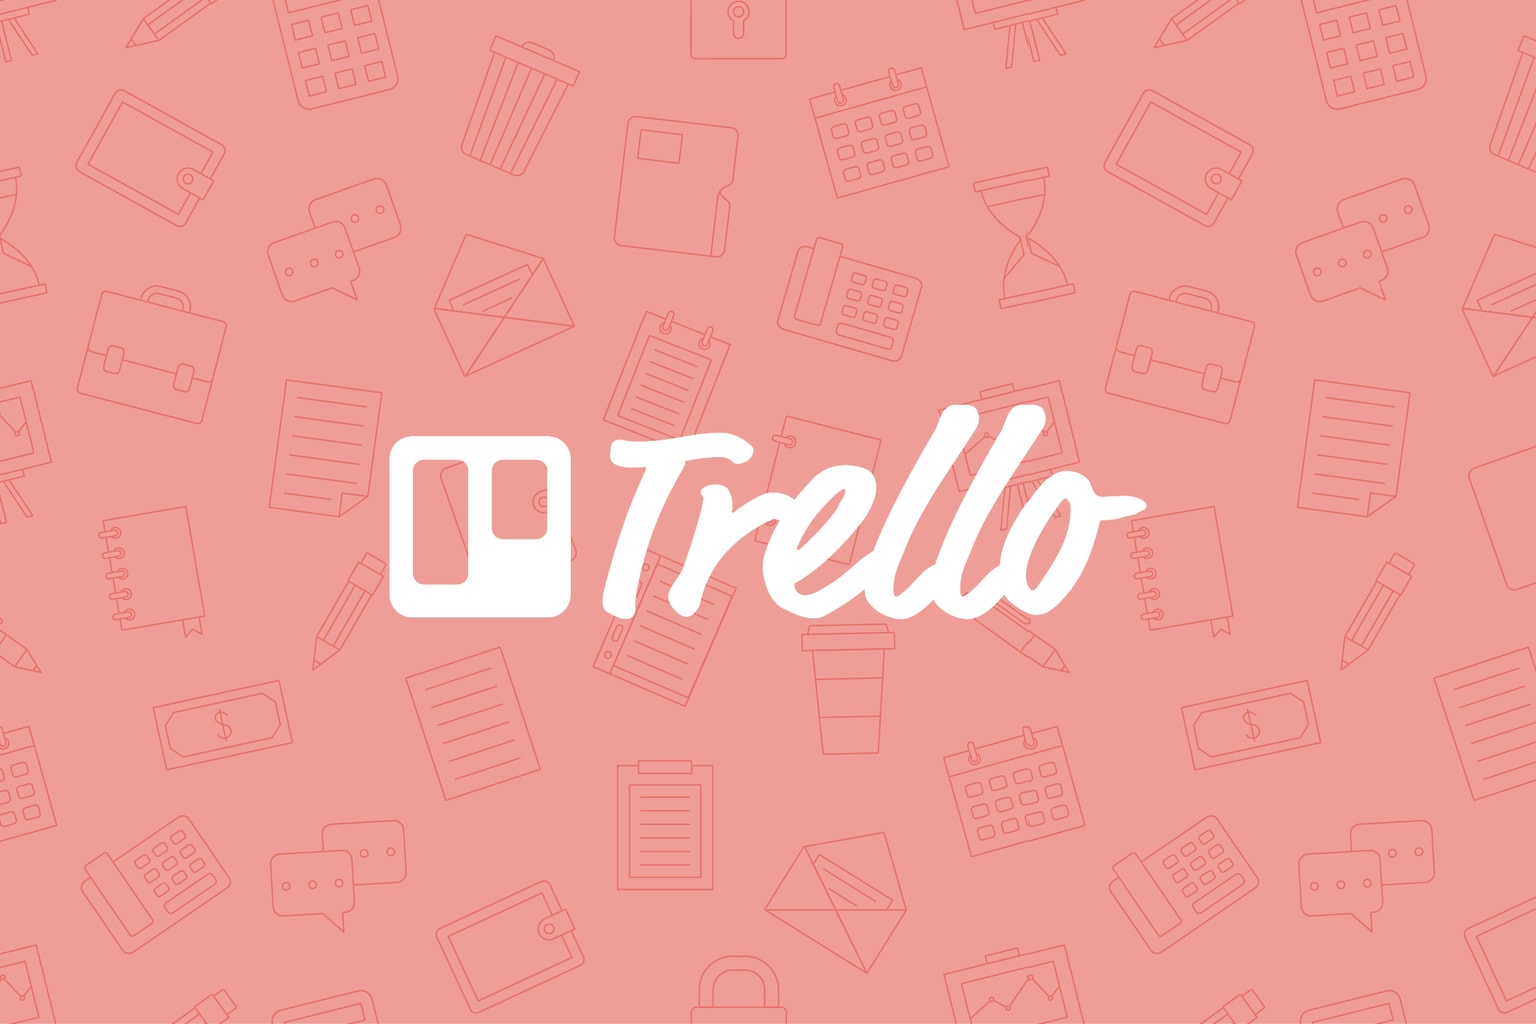 How to Use Trello for Content Management